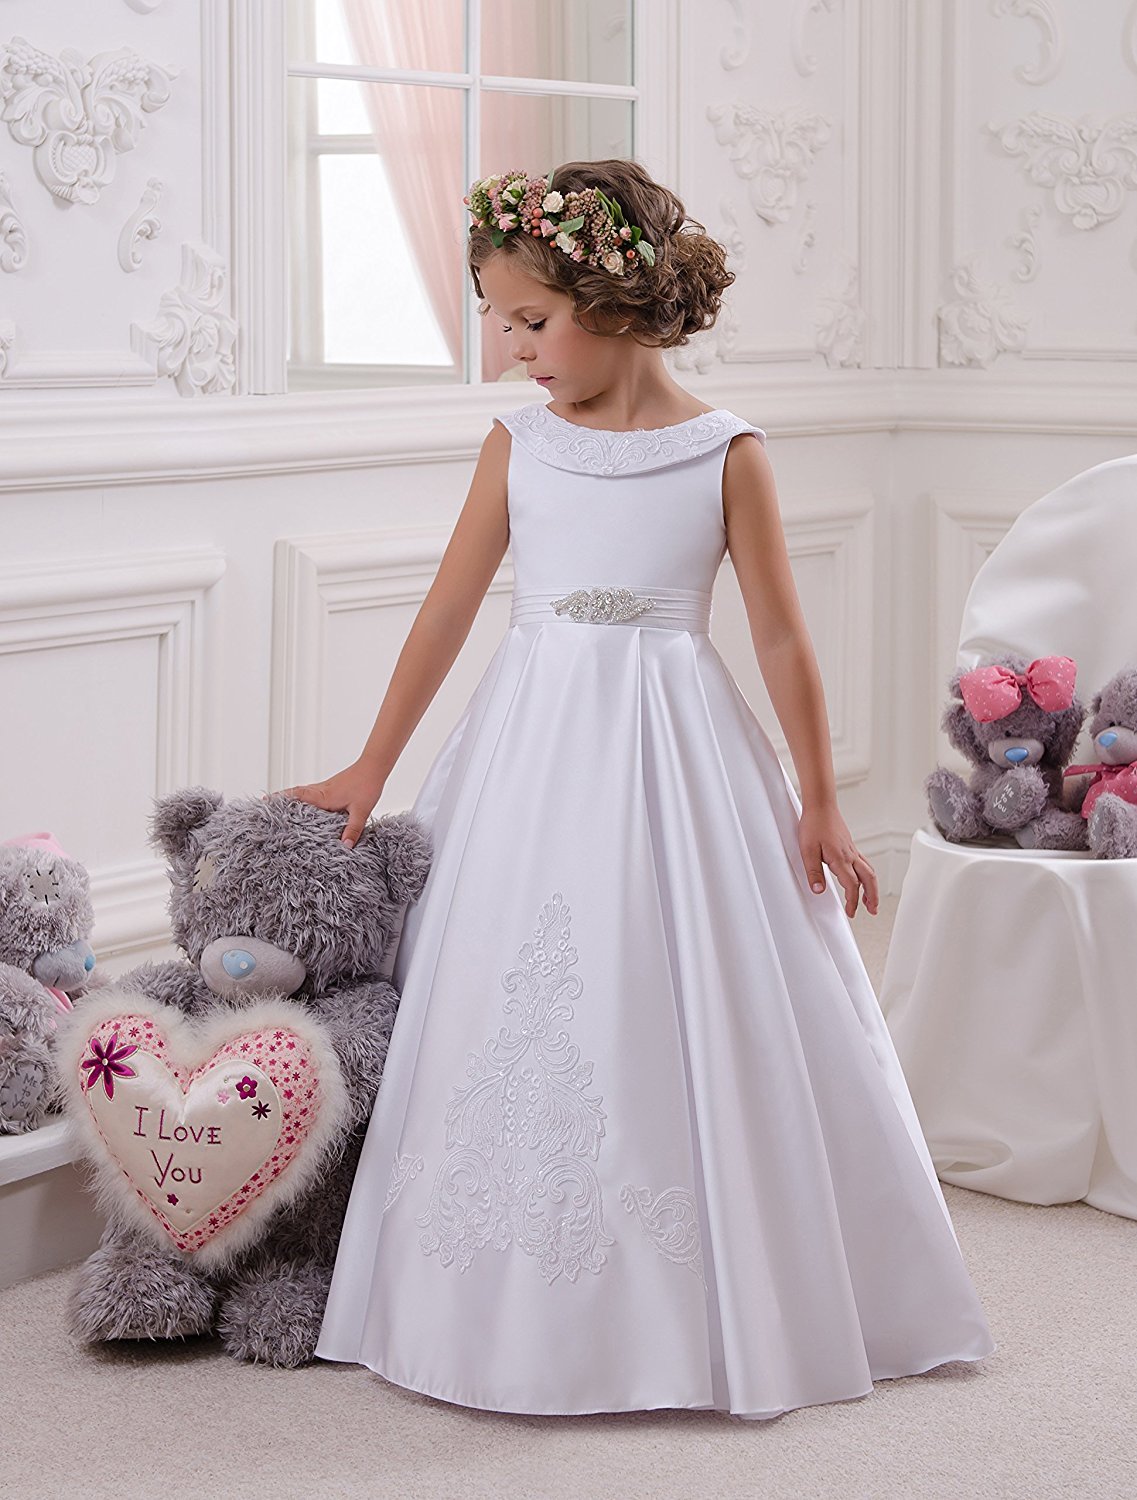 Avadress Little Girls Dresses Elegant O-Neck Sleeveless Kids Ball Gown A-Line Stain Party Wedding Dresses for Girls 2-12 Year Old 4 / Ivory